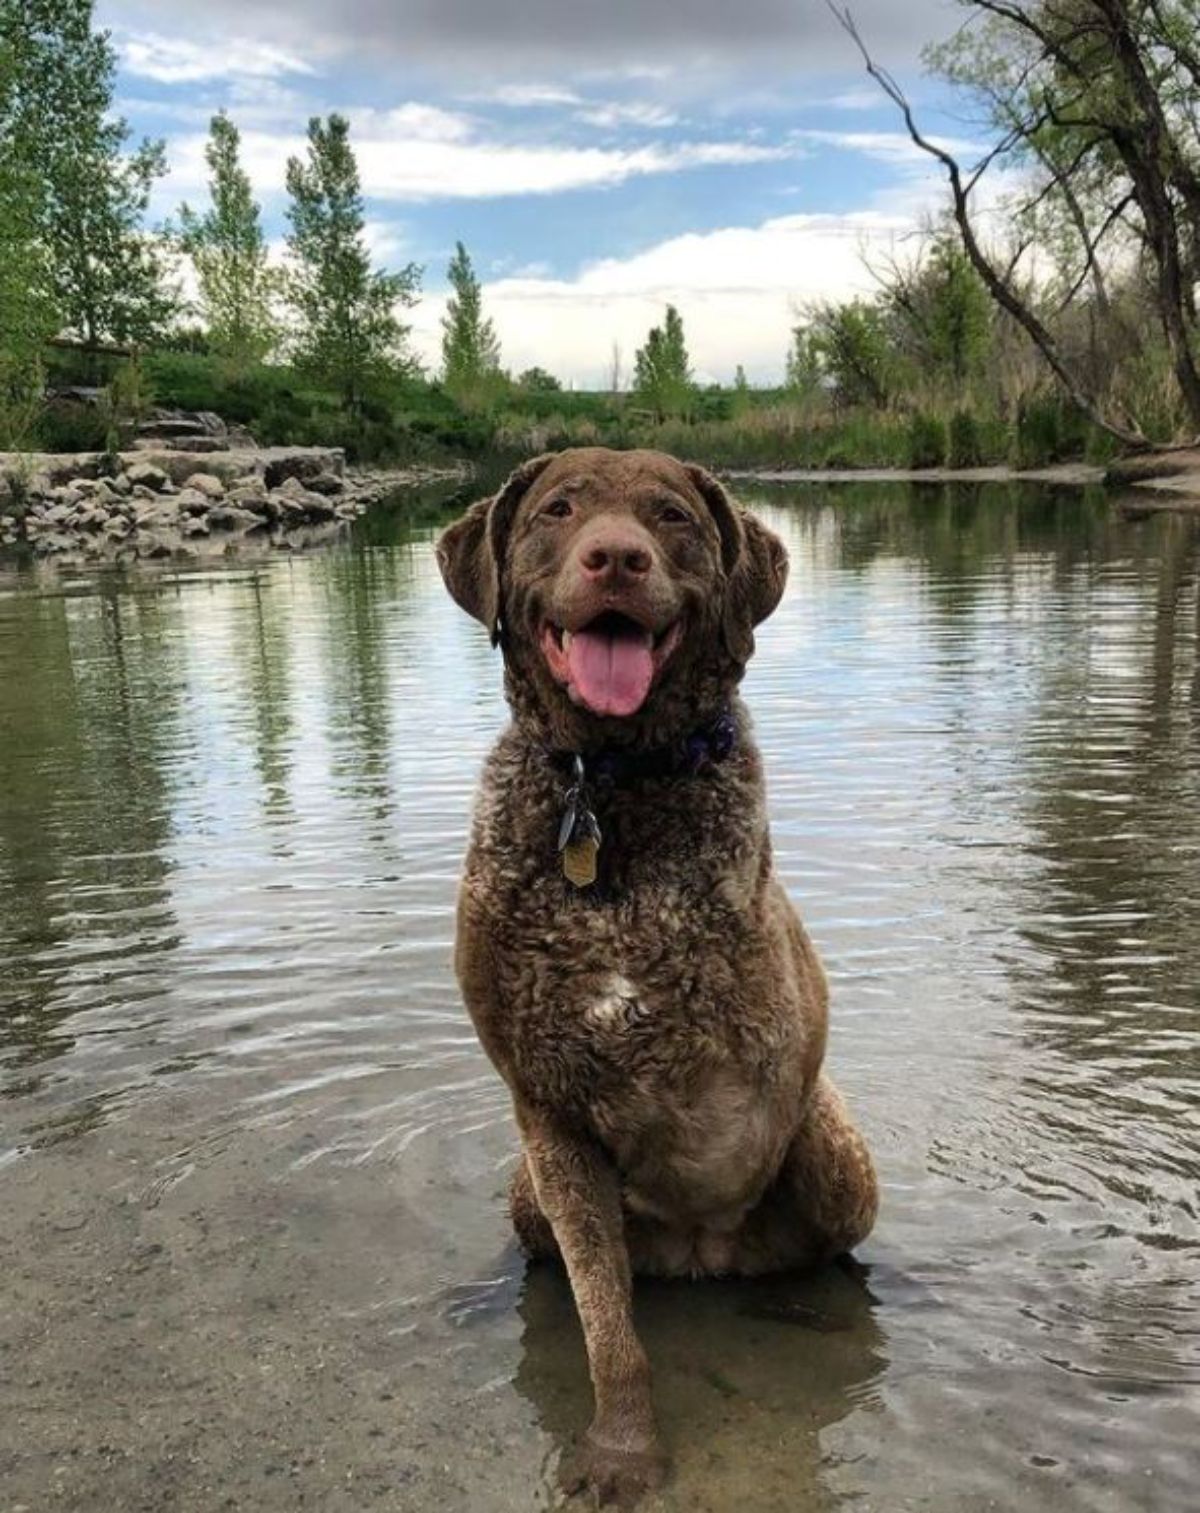 a smiling Chesapeake Bay Retriever dog sitting in the water at the edge of the lake